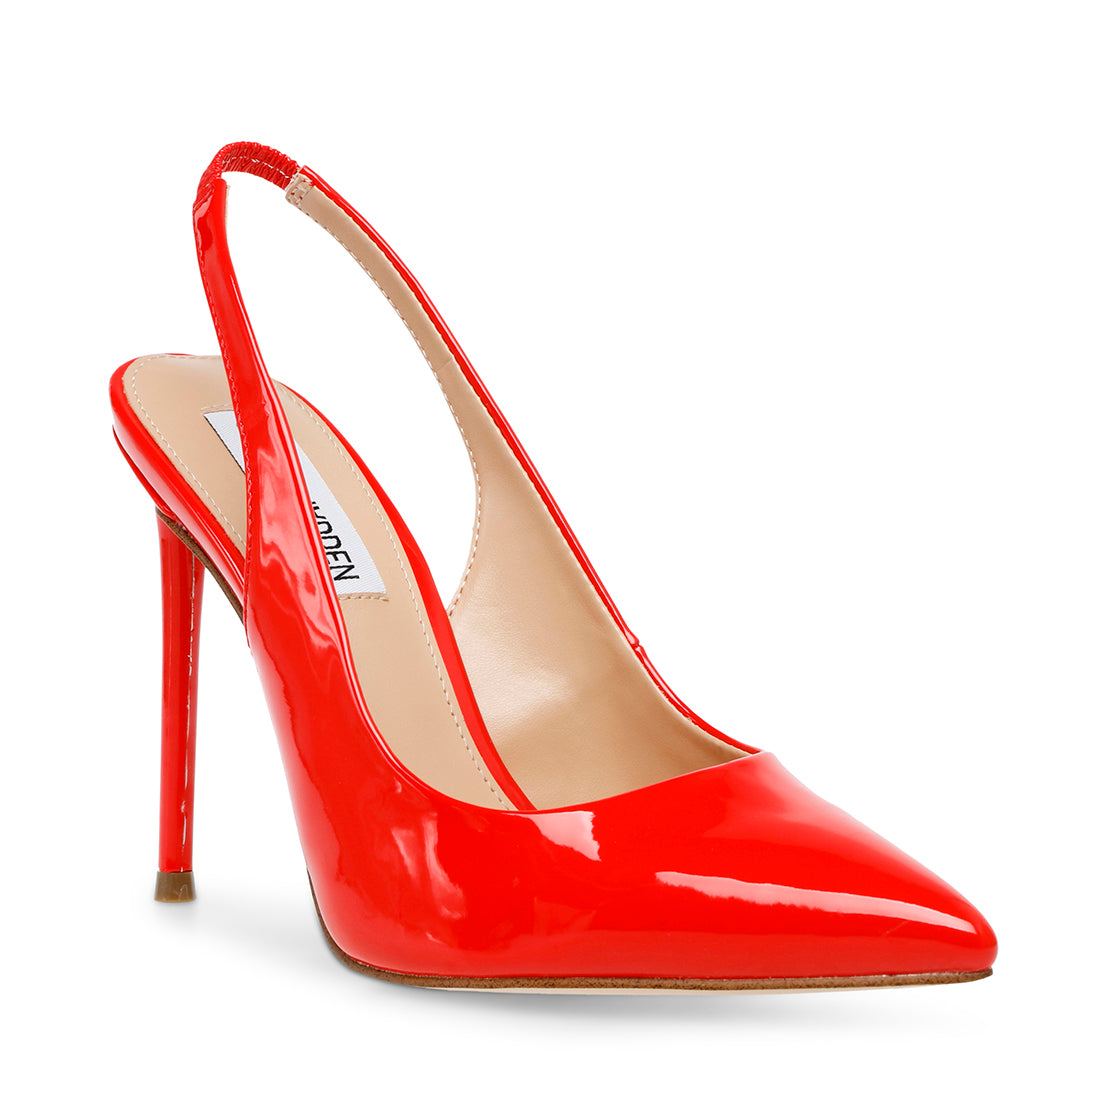 VIVIDLY RED PATENT- Hover Image